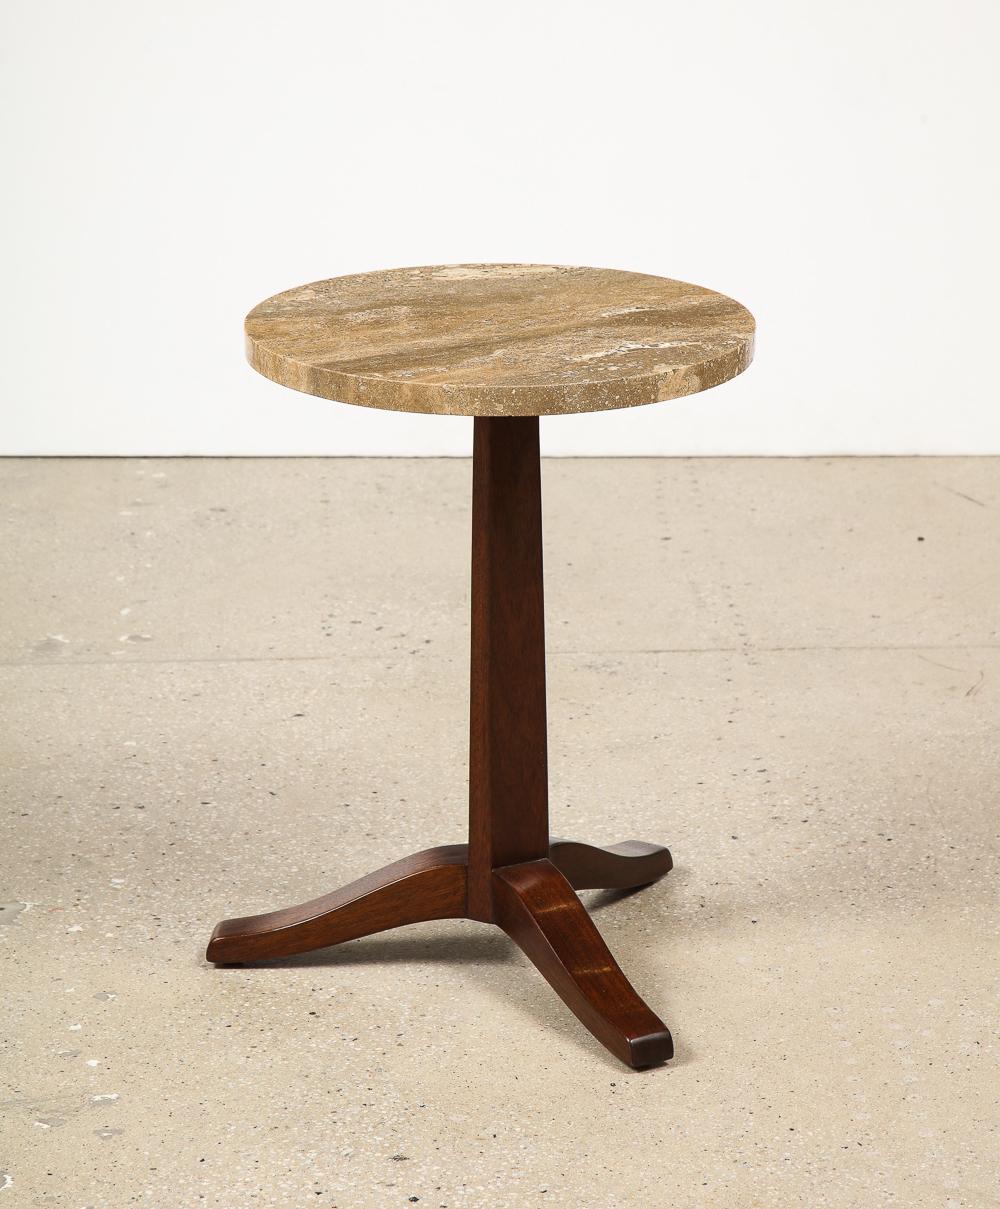 Hand-Crafted Side Table #5210 by Edward Wormley for Dunbar